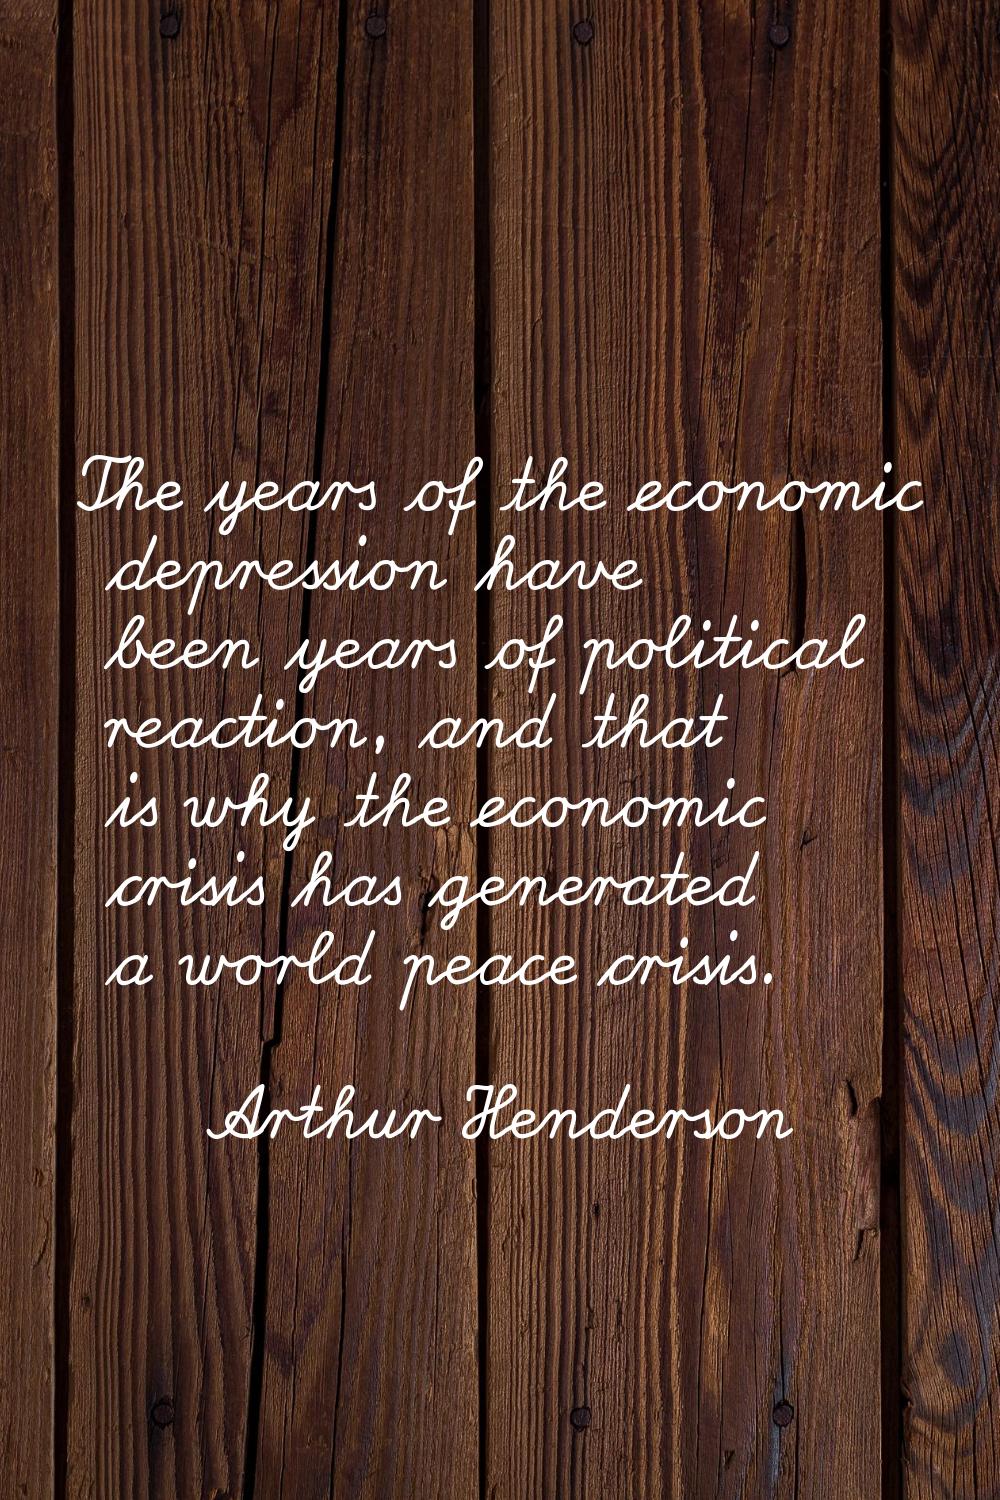 The years of the economic depression have been years of political reaction, and that is why the eco